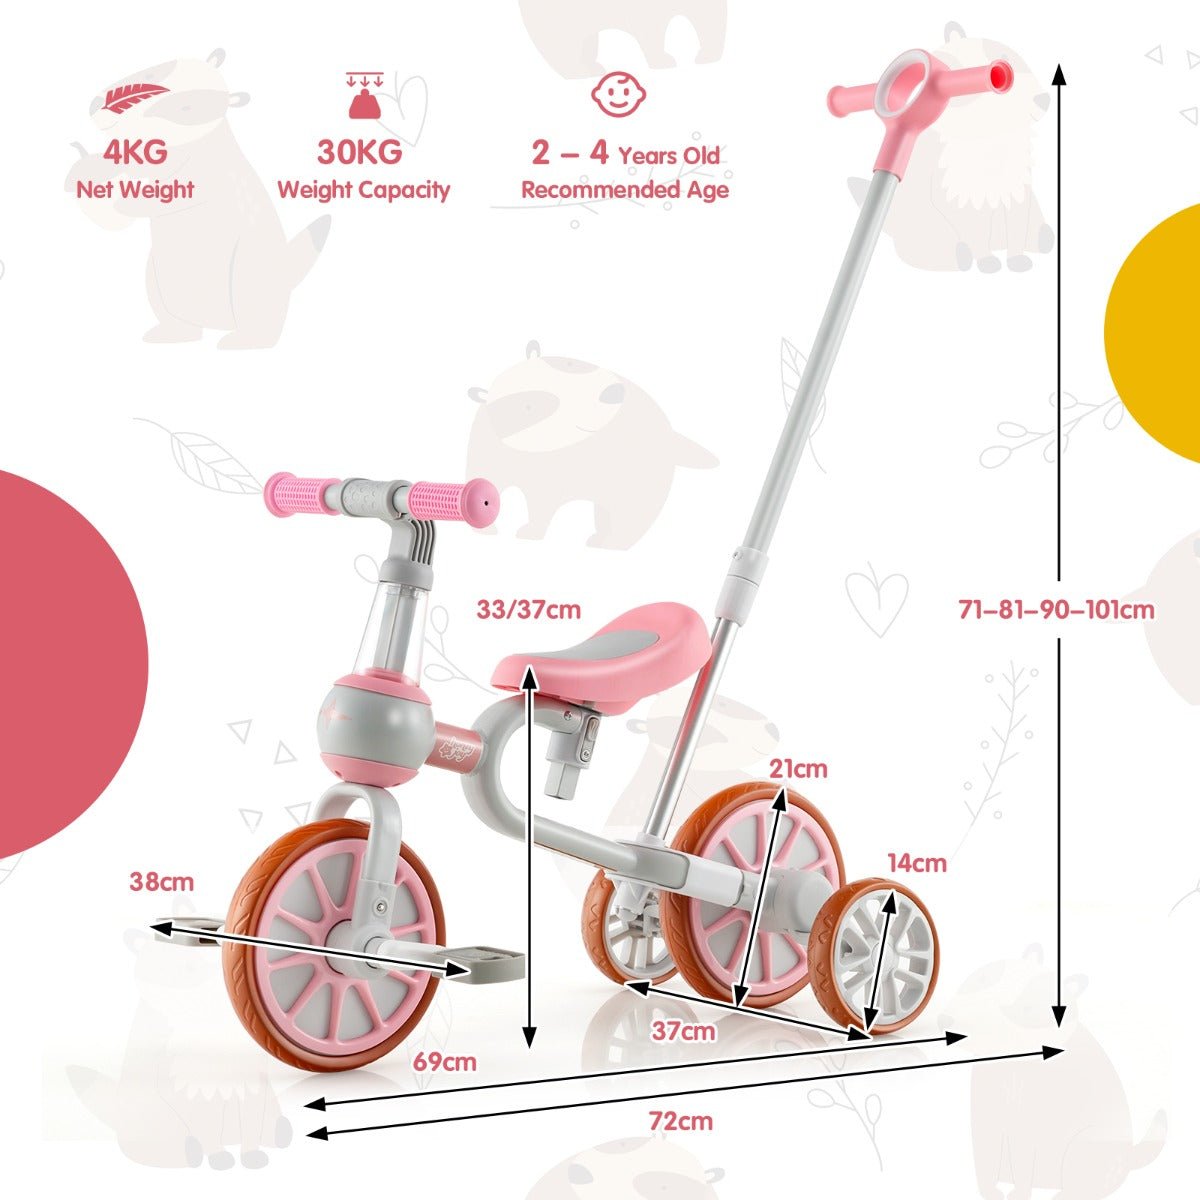 Pink Kids Trike Bike - 4-in-1 with Parent Push Handle, Ages 2-4